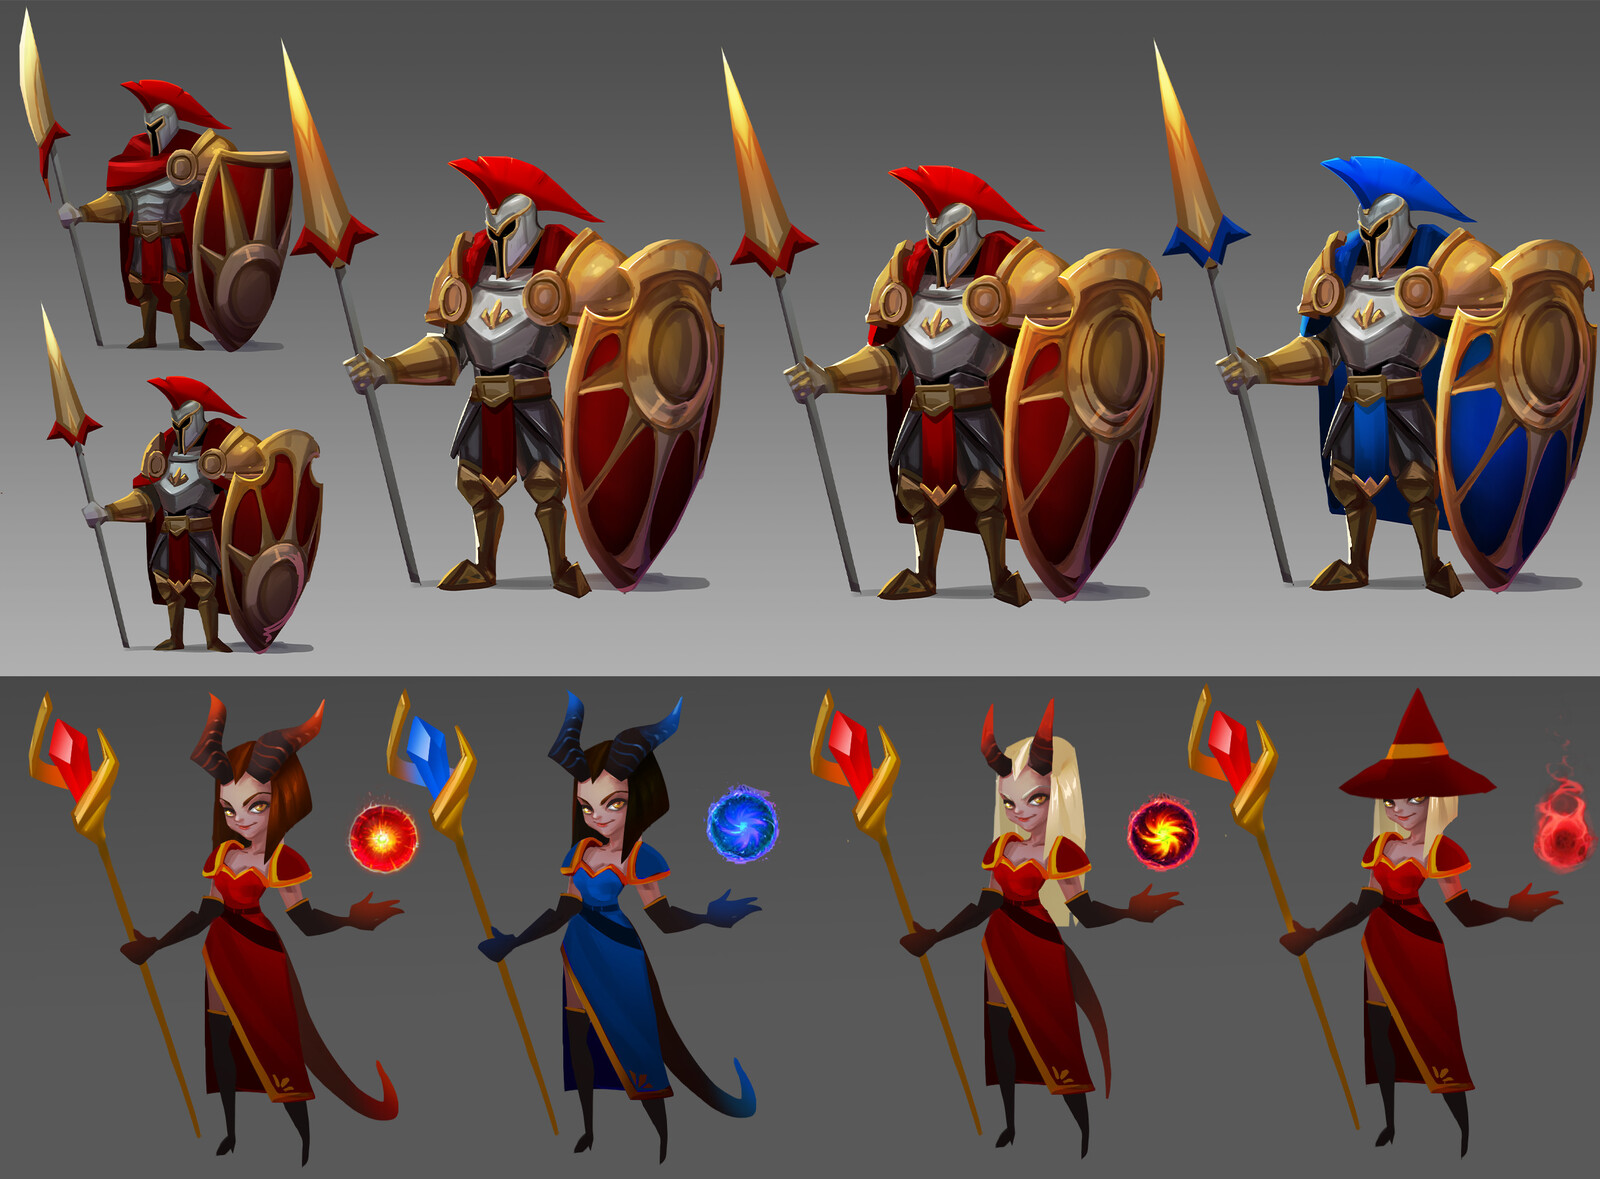 Concepts for mobile games